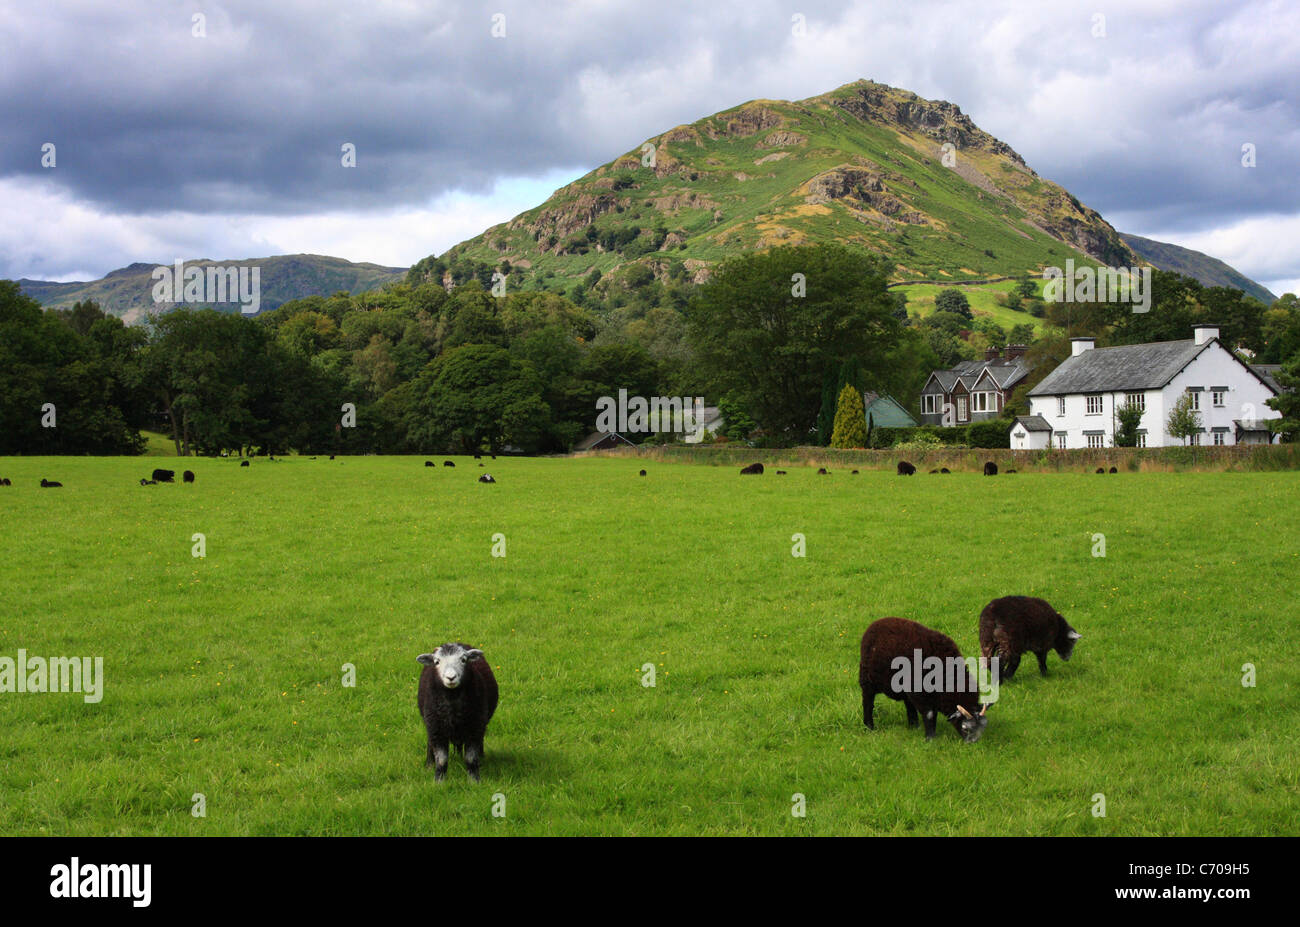 Grazing Herdwick sheep with Helm's Crag in the background, Grasmere, Lake District National Park, Cumbria, England, Europe Stock Photo